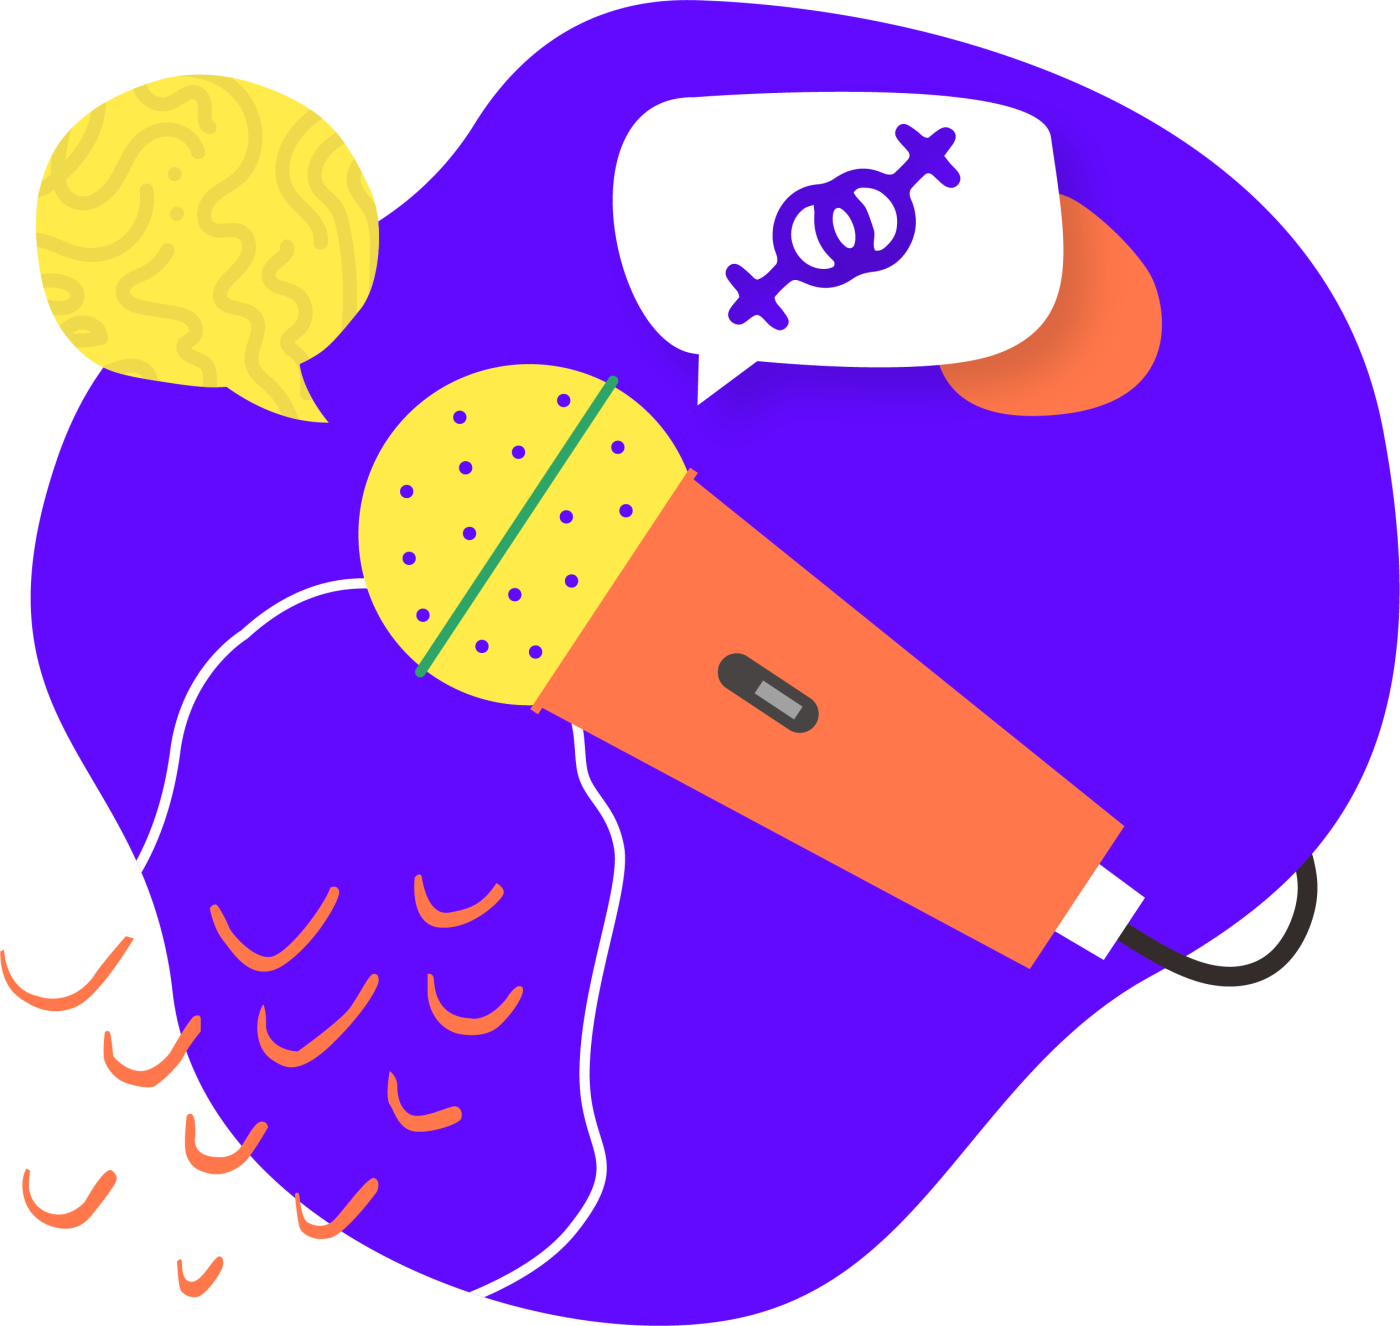 An illustrated microphone emits sounds, a speech bubble, and a speech bubble with interlocked symbols for men.